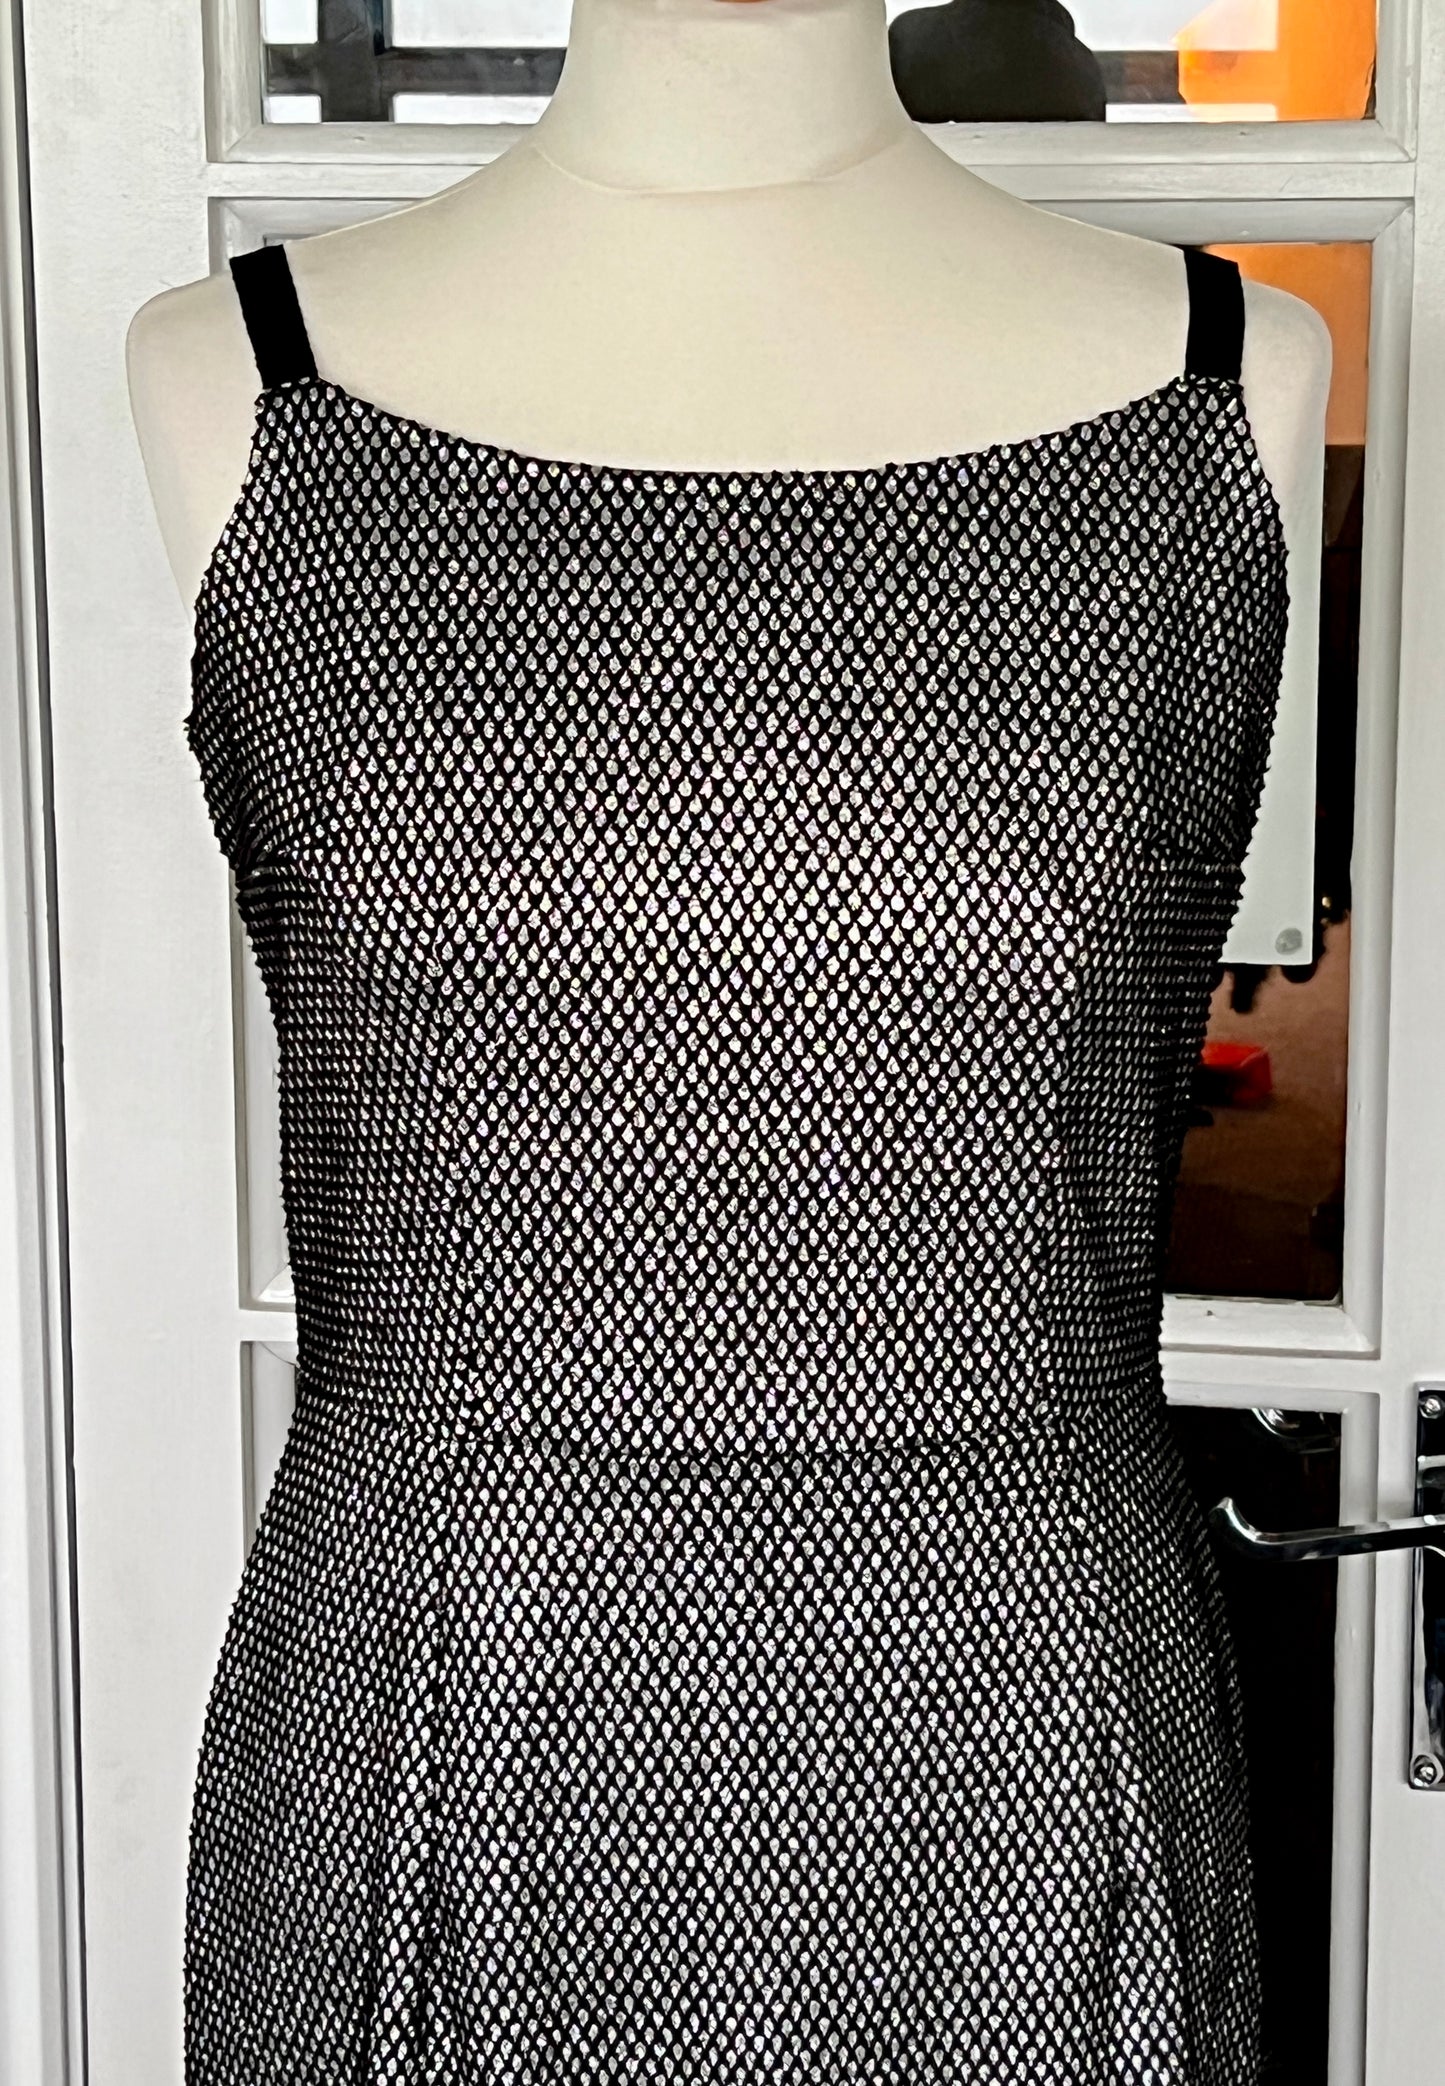 Vintage 1950s style silver lurex and black fishnet wiggle dress M only